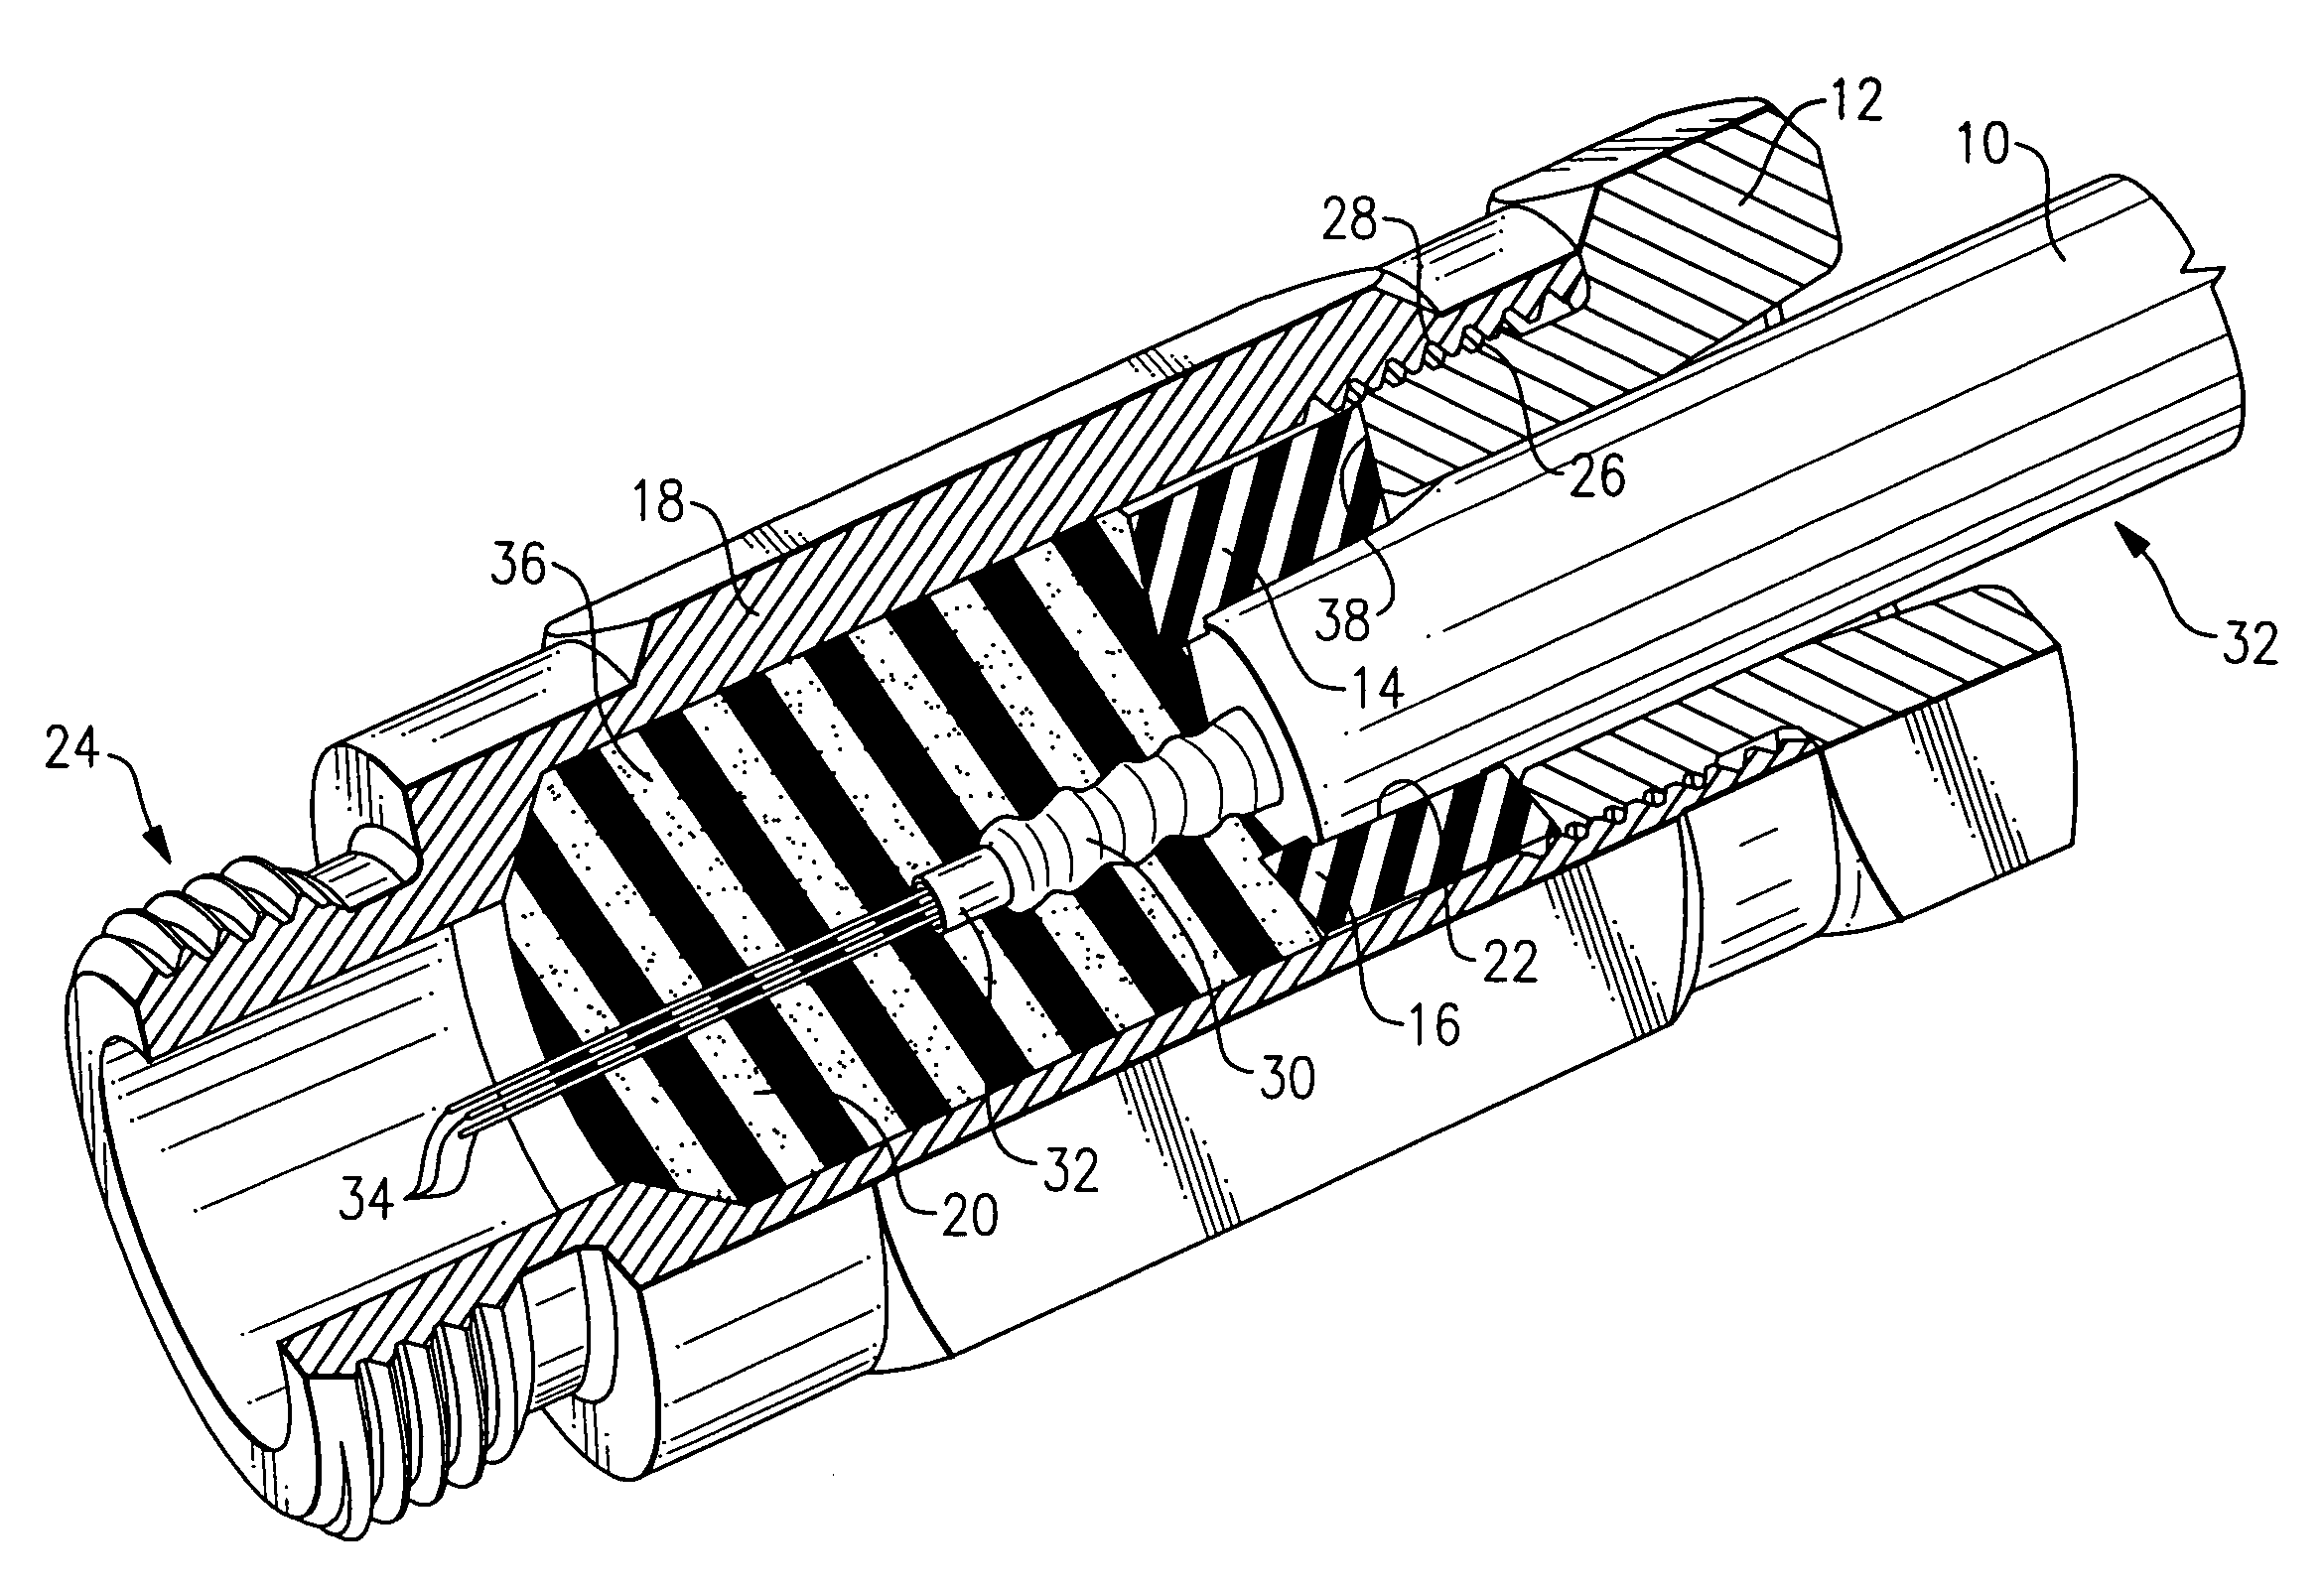 Epoxy bonded fiber optic connector and method of constructing same